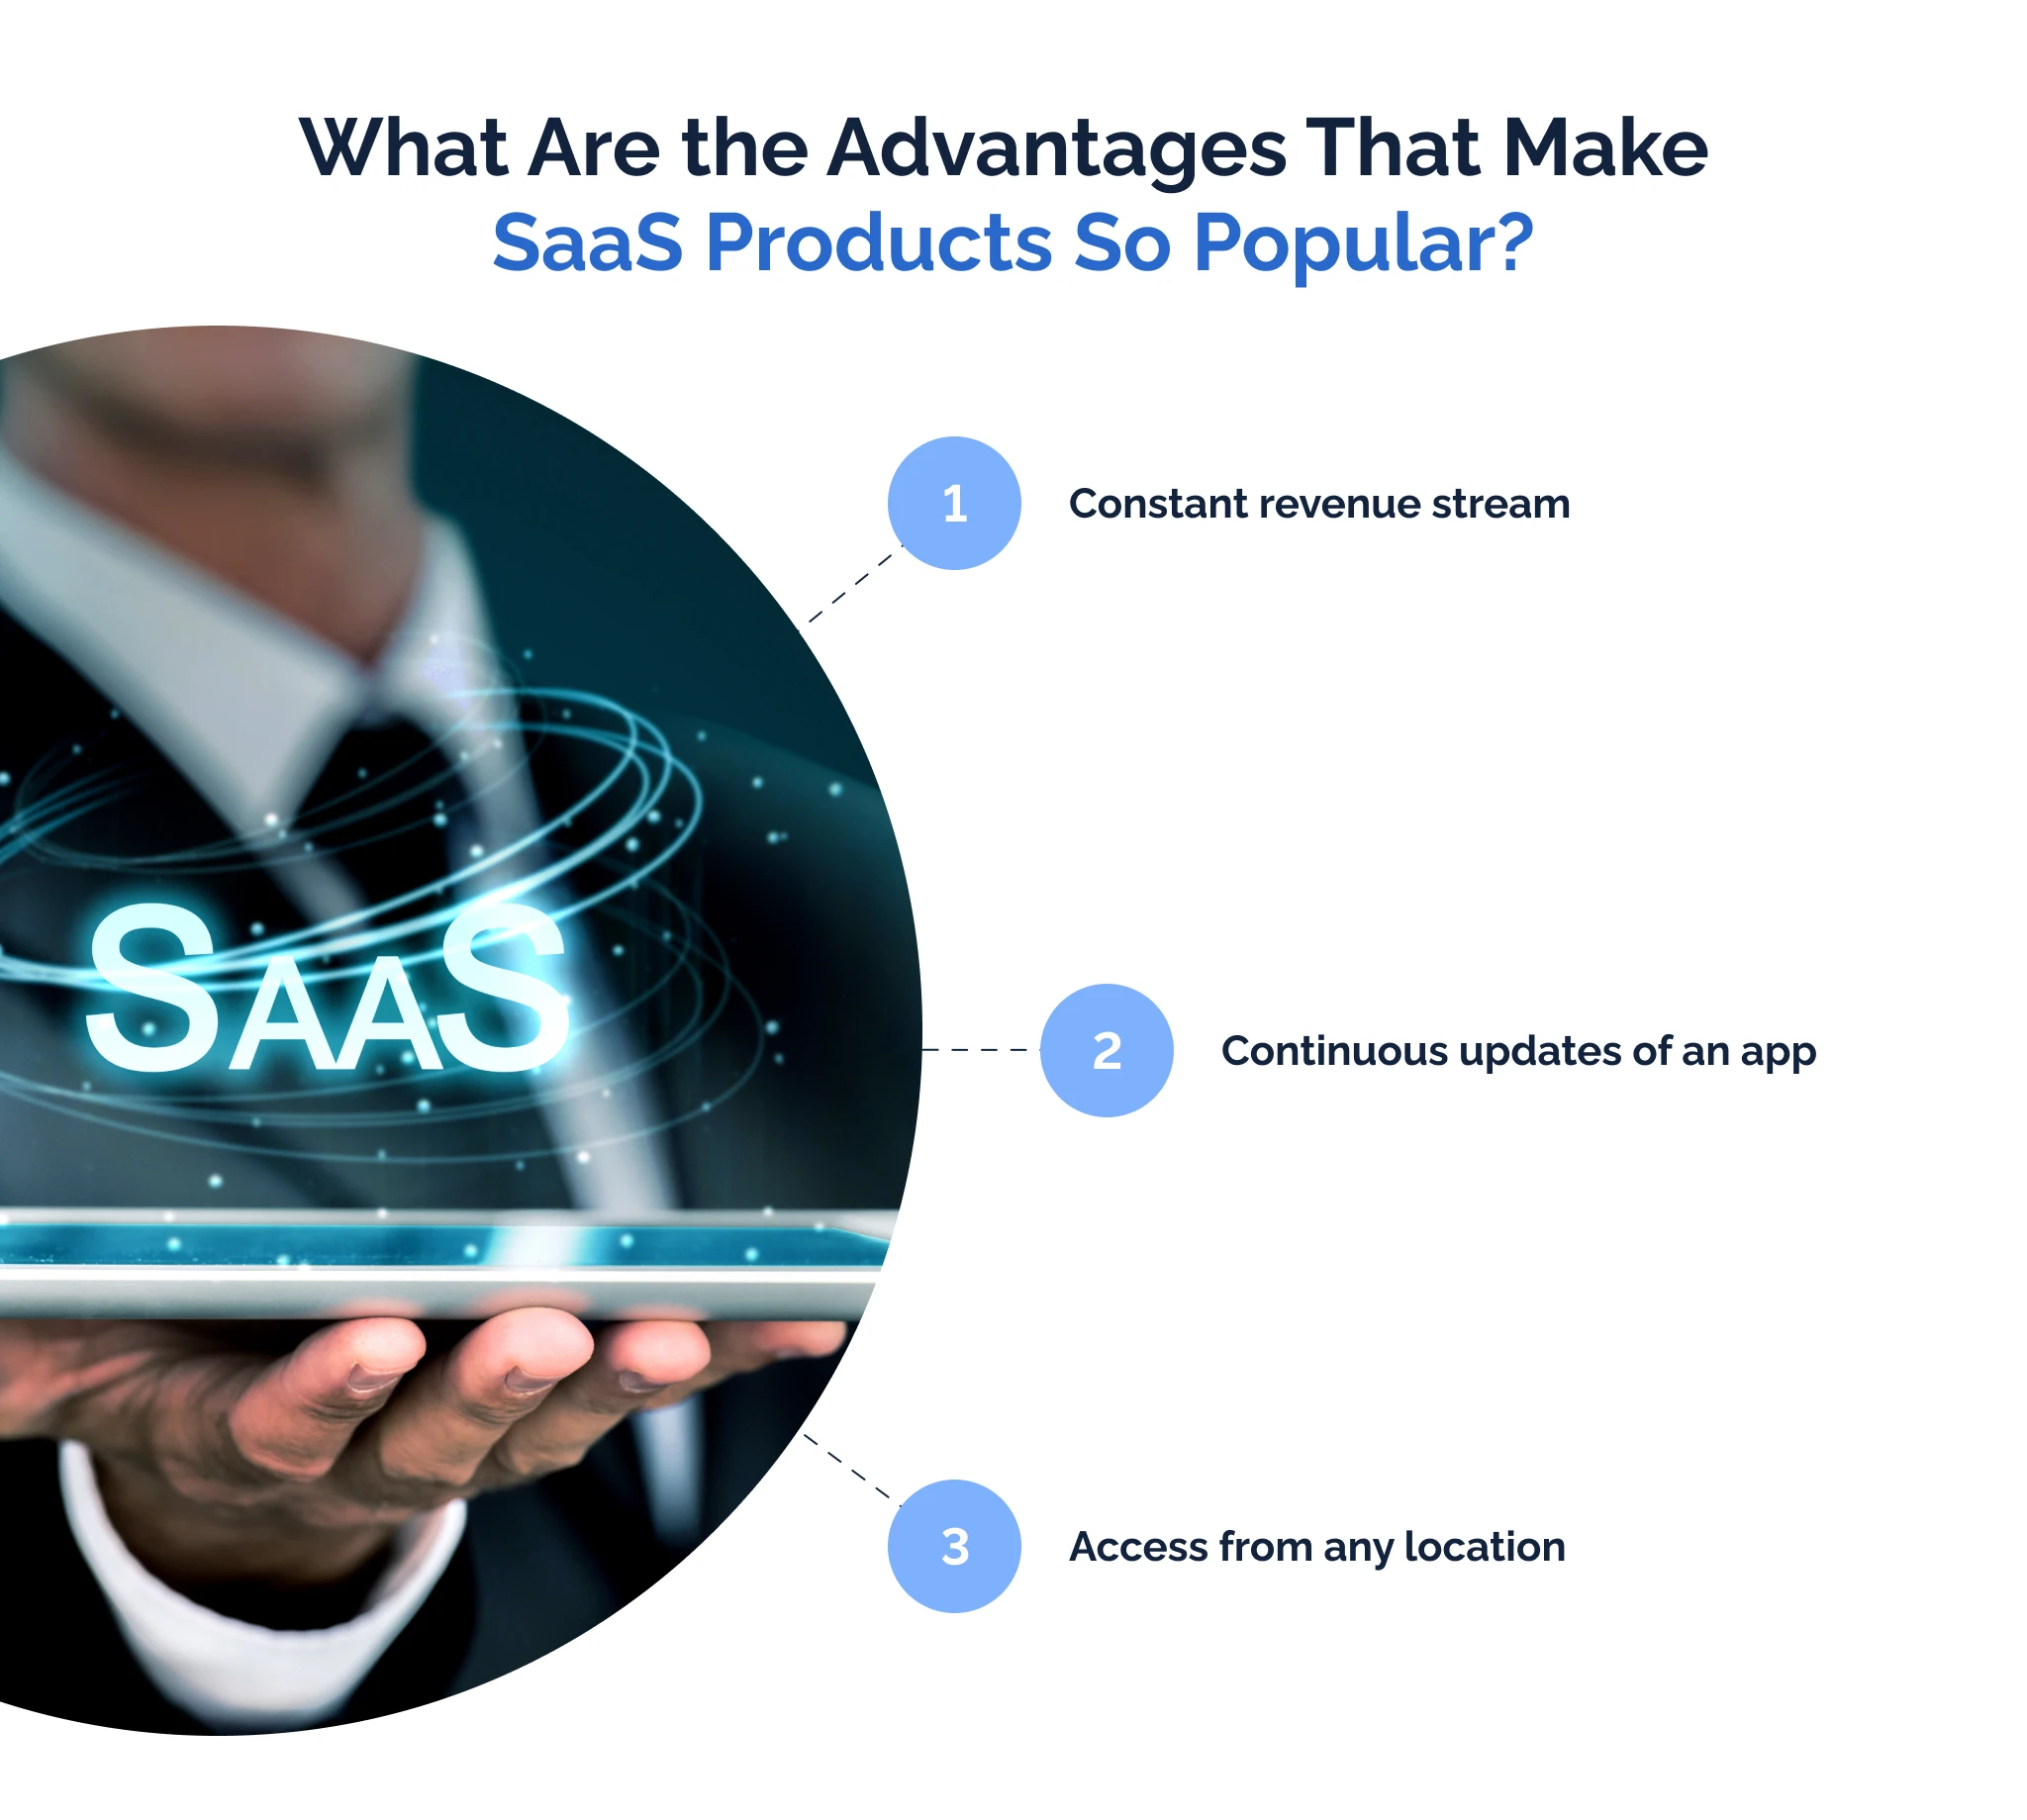 What are the advantages that make SaaS products so popular?